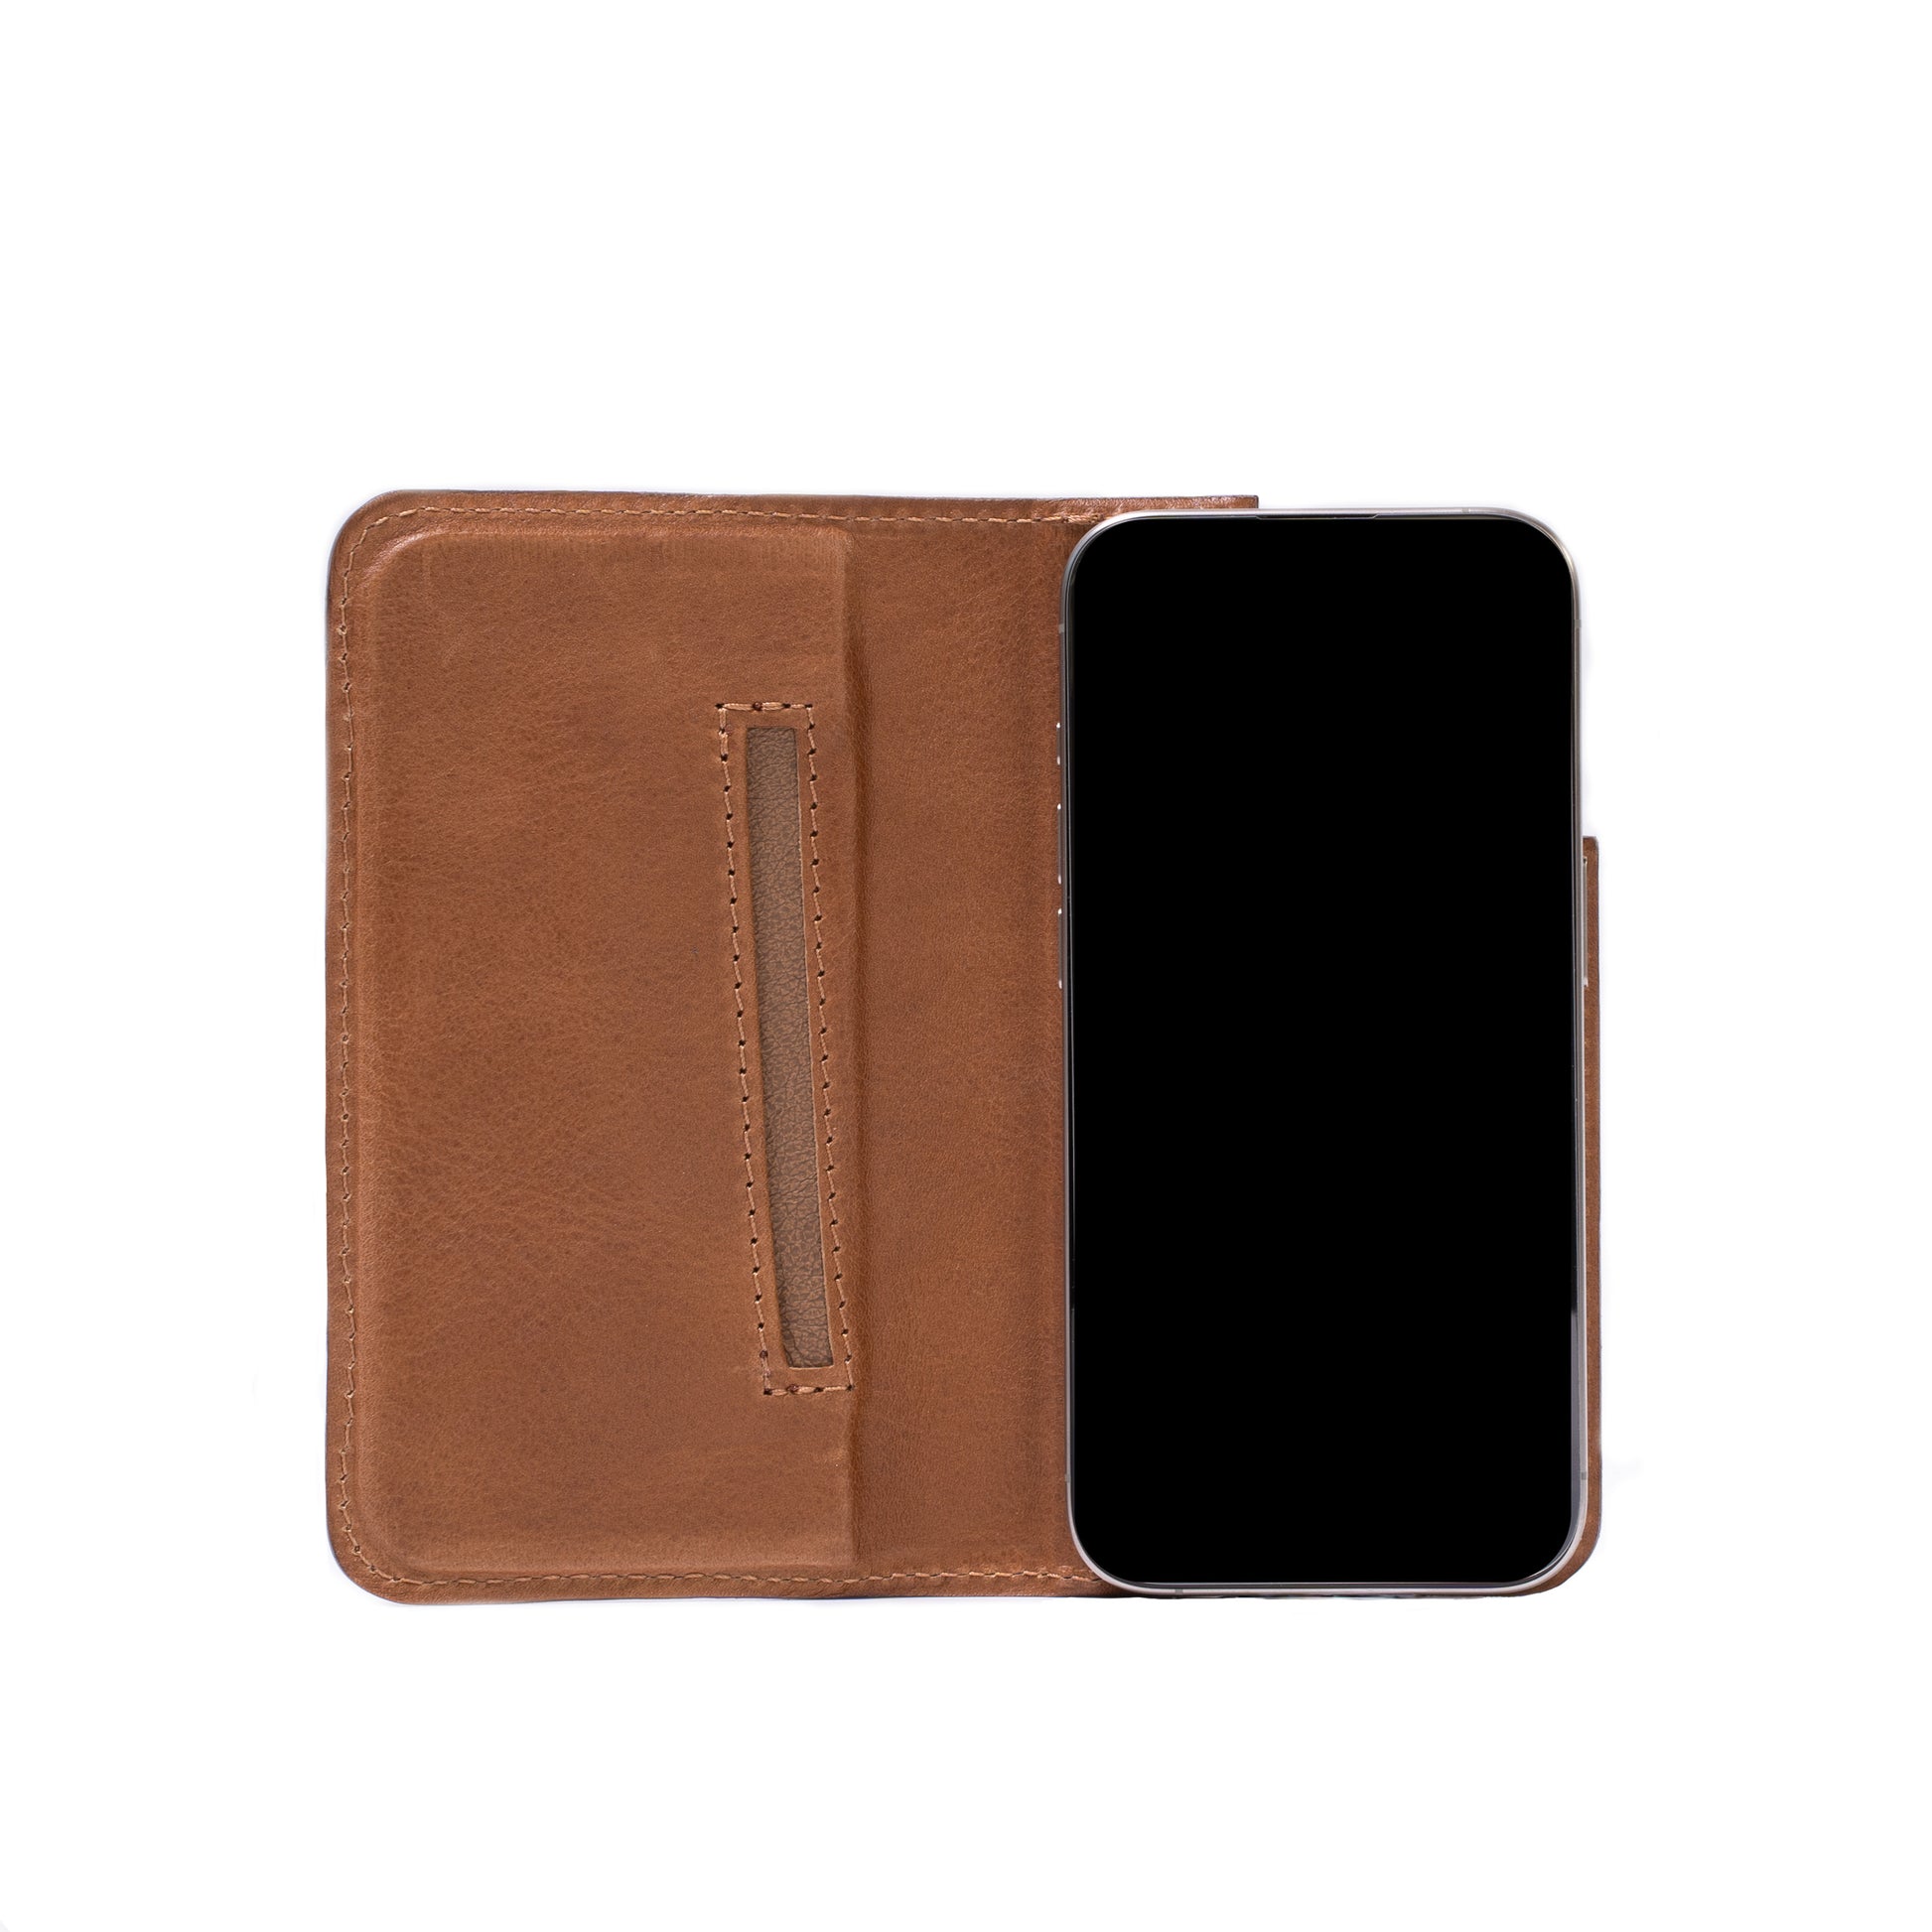 Flip-case with MagSafe for iPhone 15 Pro Max - The Minimalist 3.0, made by Geometric Goods in classic brown color